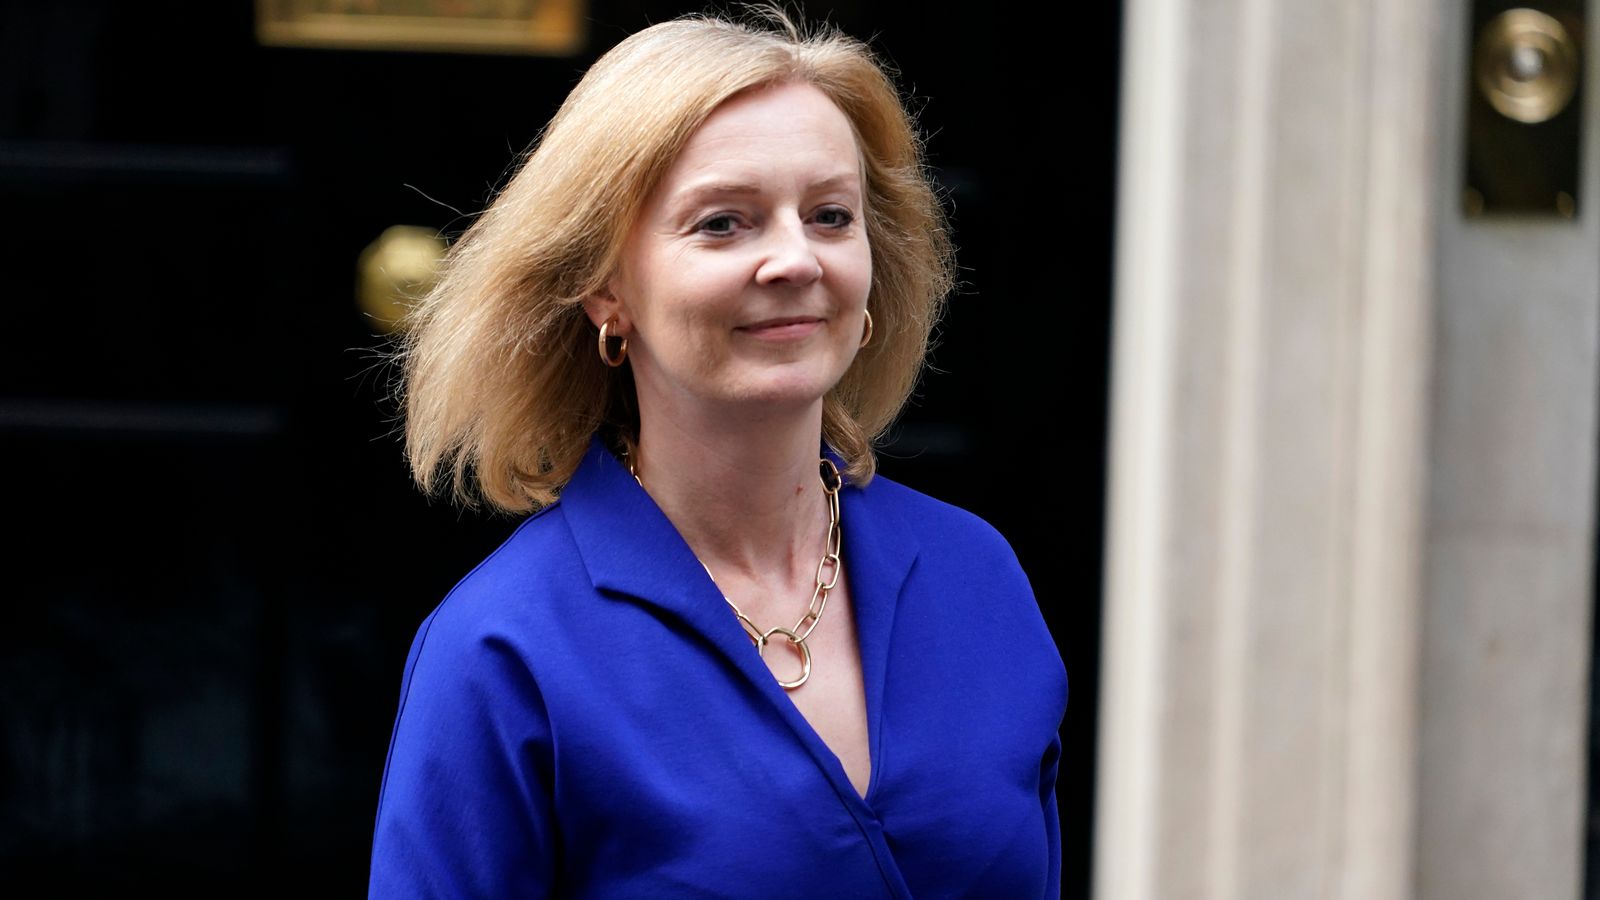 Cabinet fixing: Liz Truss has replaced Dominic Raab as foreign secretary.  Raab will appointed as deputy prime minister, lord chancellor and justice secretary